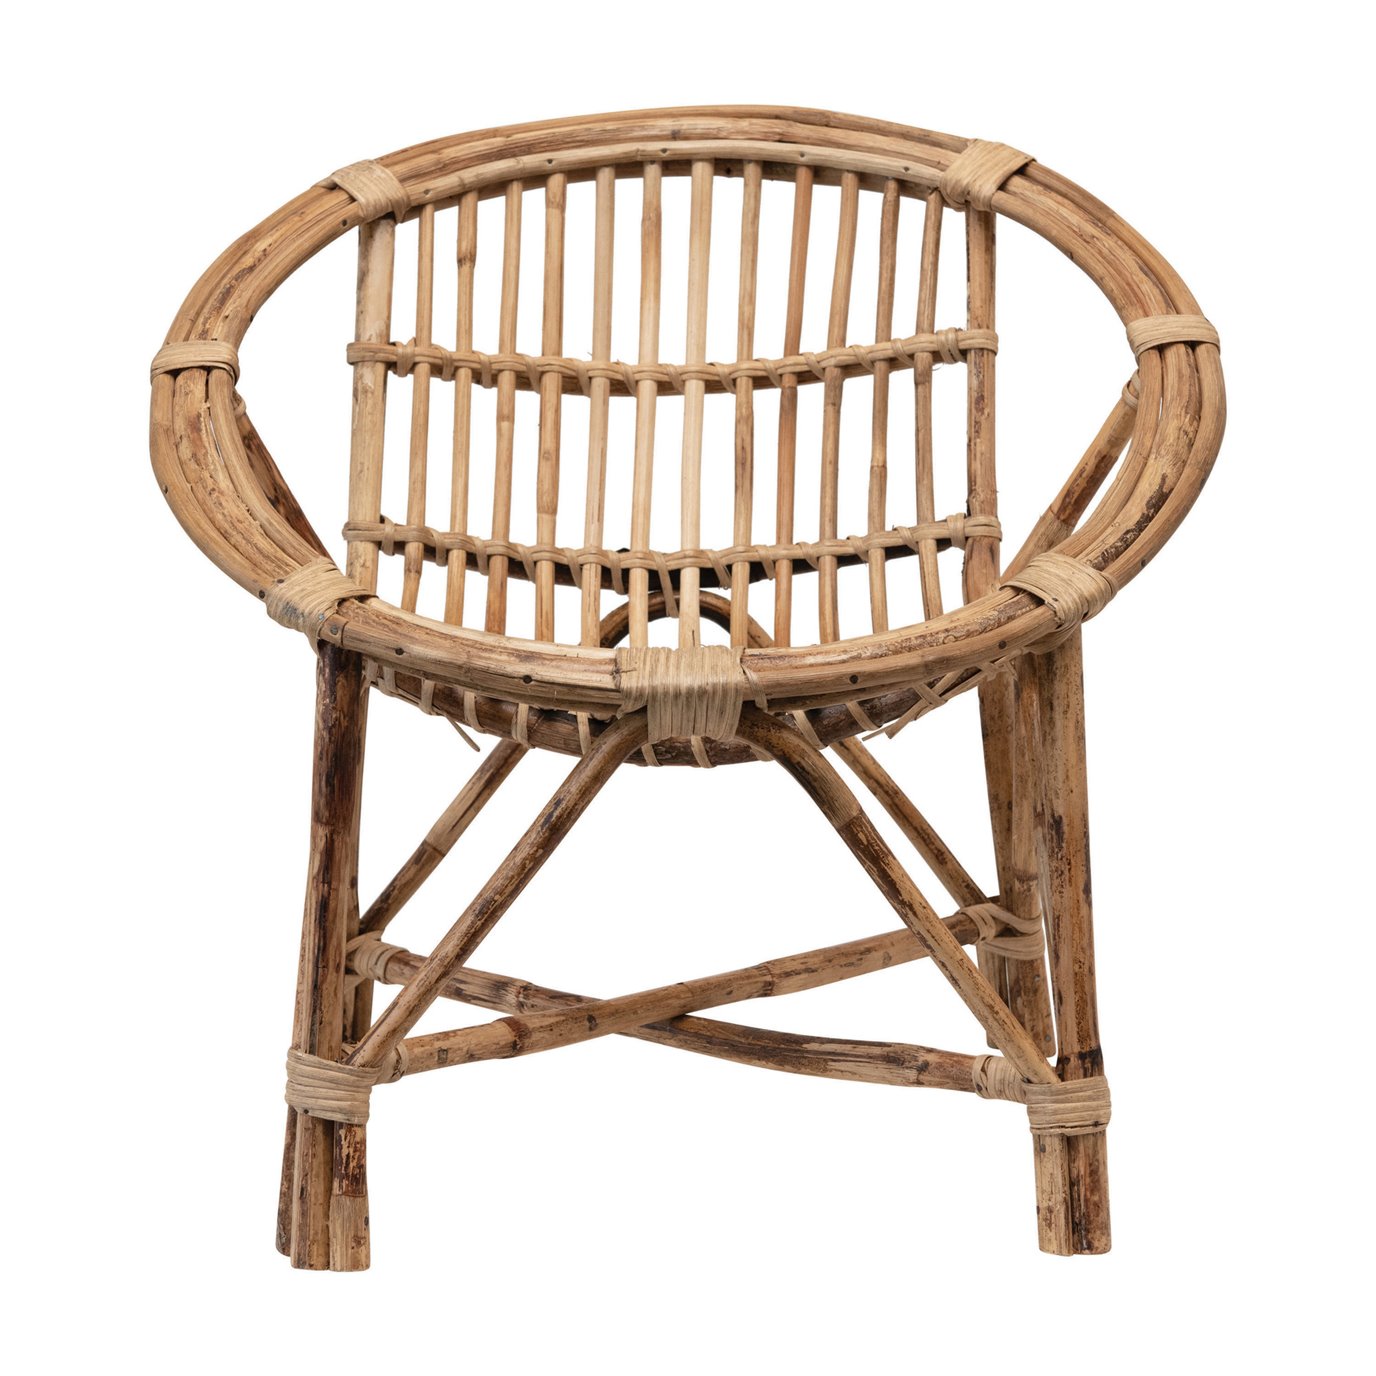 Hand-Woven Rattan Chair, Natural by Creative Co-op